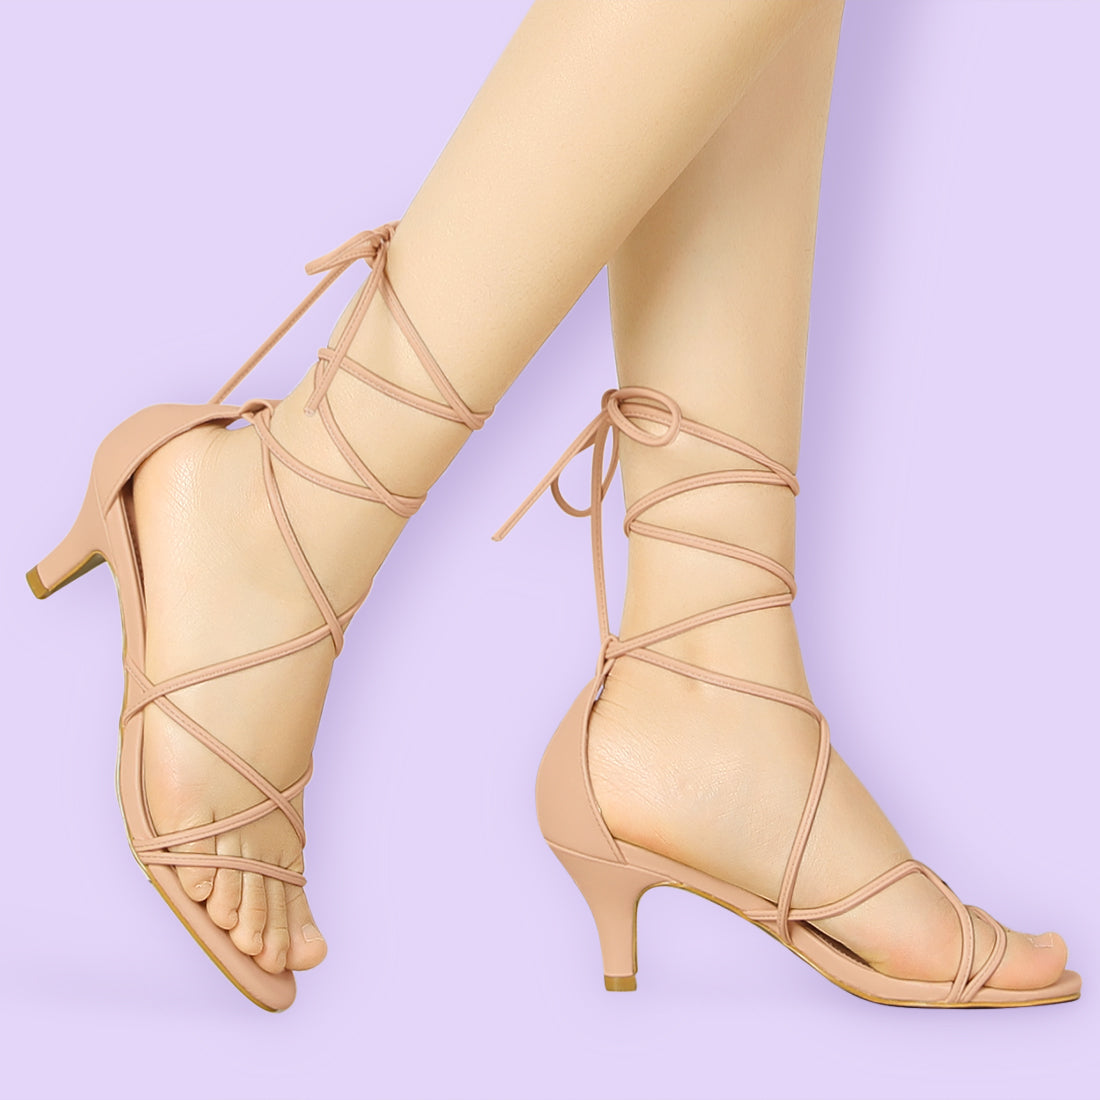 Allegra K Synthetic Leather Strappy Kitten Heel Lace Up Sandals